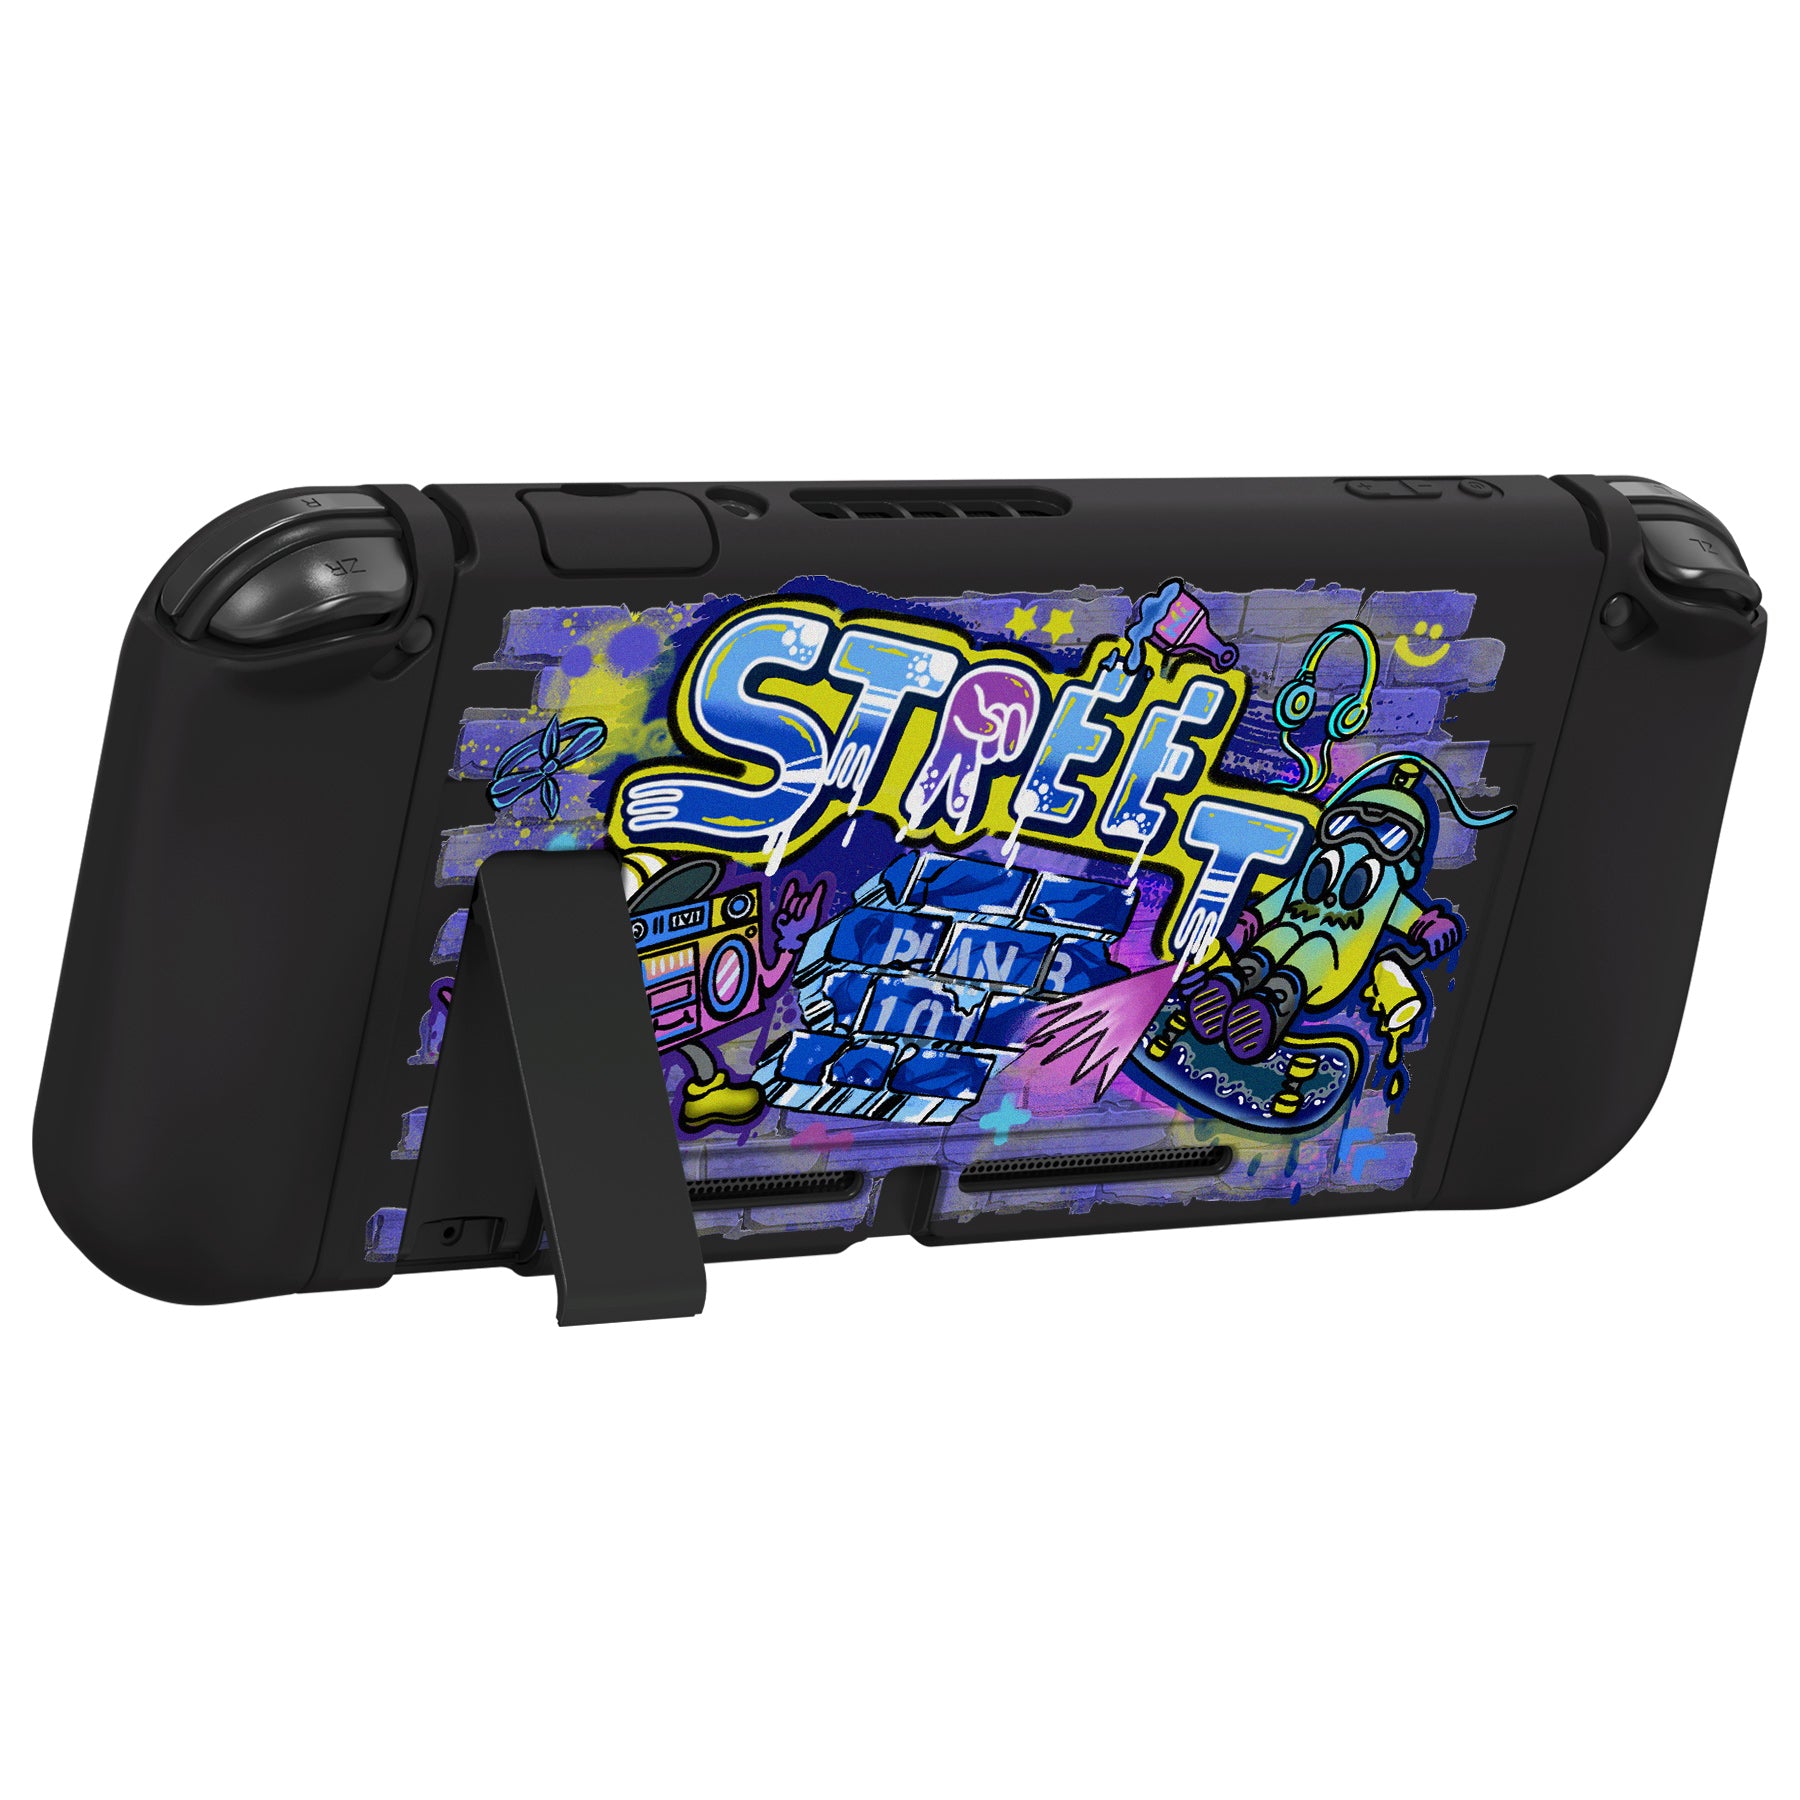 PlayVital ZealProtect Soft Protective Case for Nintendo Switch, Flexible Cover for Switch with Tempered Glass Screen Protector & Thumb Grips & ABXY Direction Button Caps - Street Art - RNSYV6050 playvital